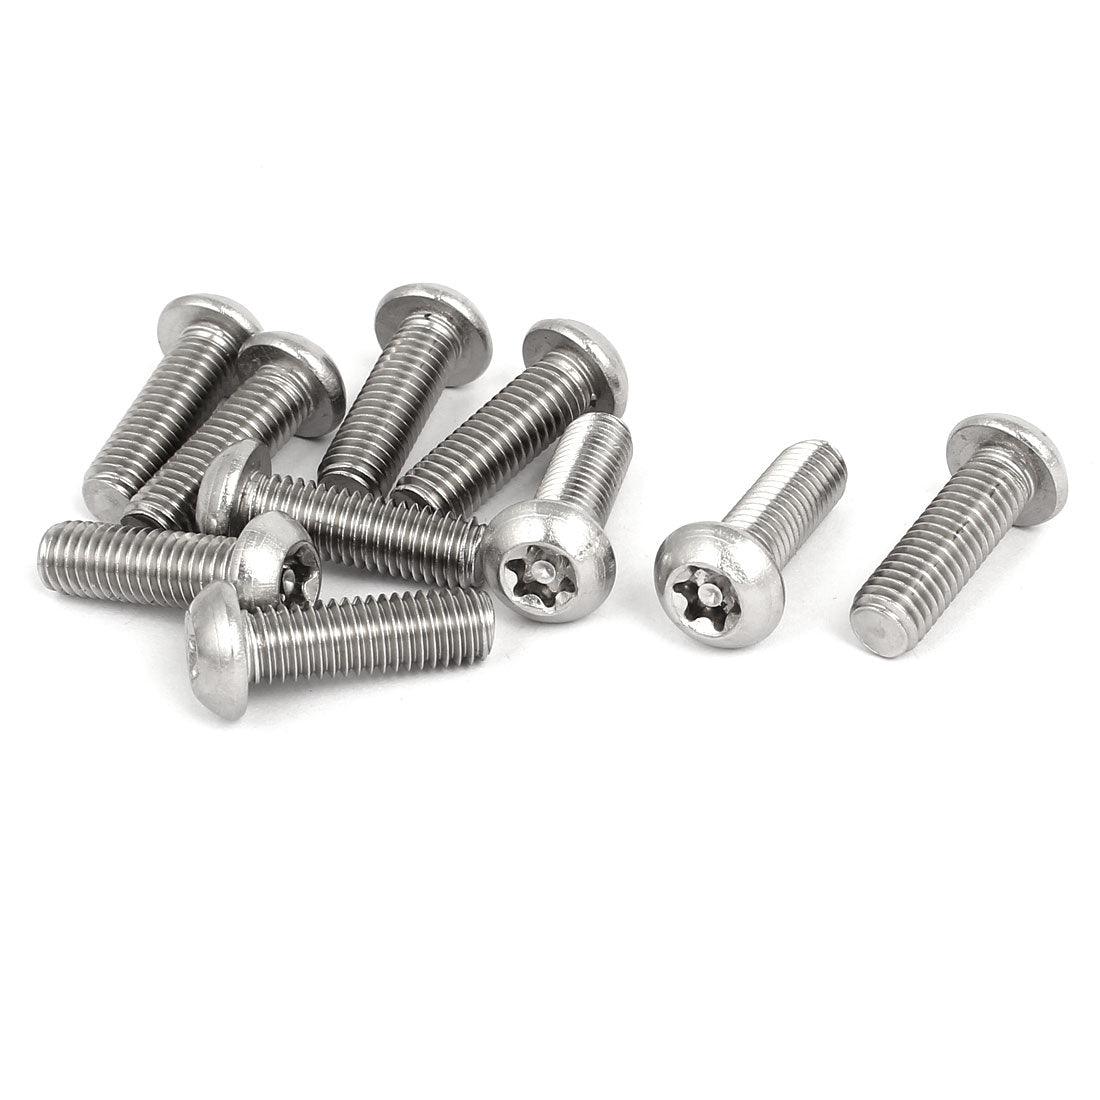 uxcell Uxcell M8x25mm 304 Stainless Steel Button Head Torx Security Machine Screws 10pcs